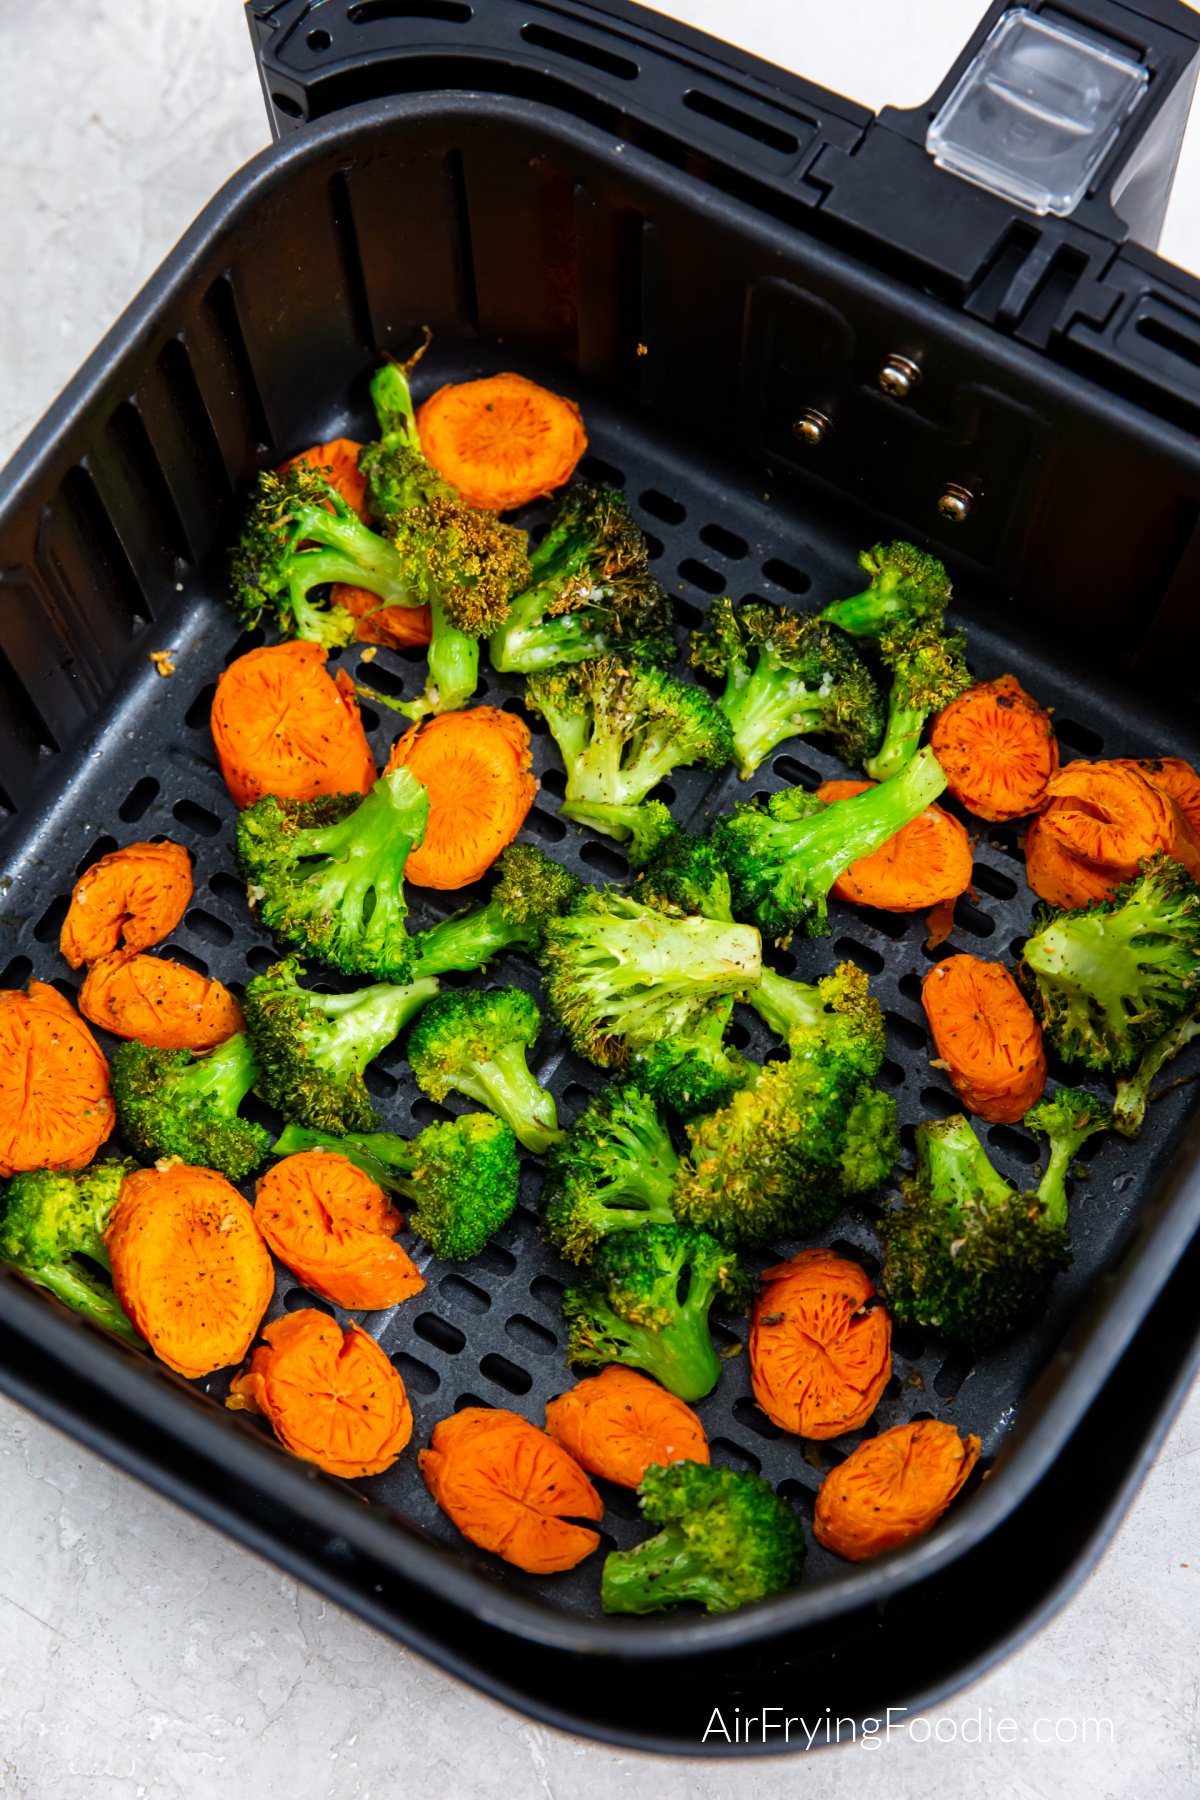 Seasoned and air fried carrots and broccoli in the basket of the air fryer.